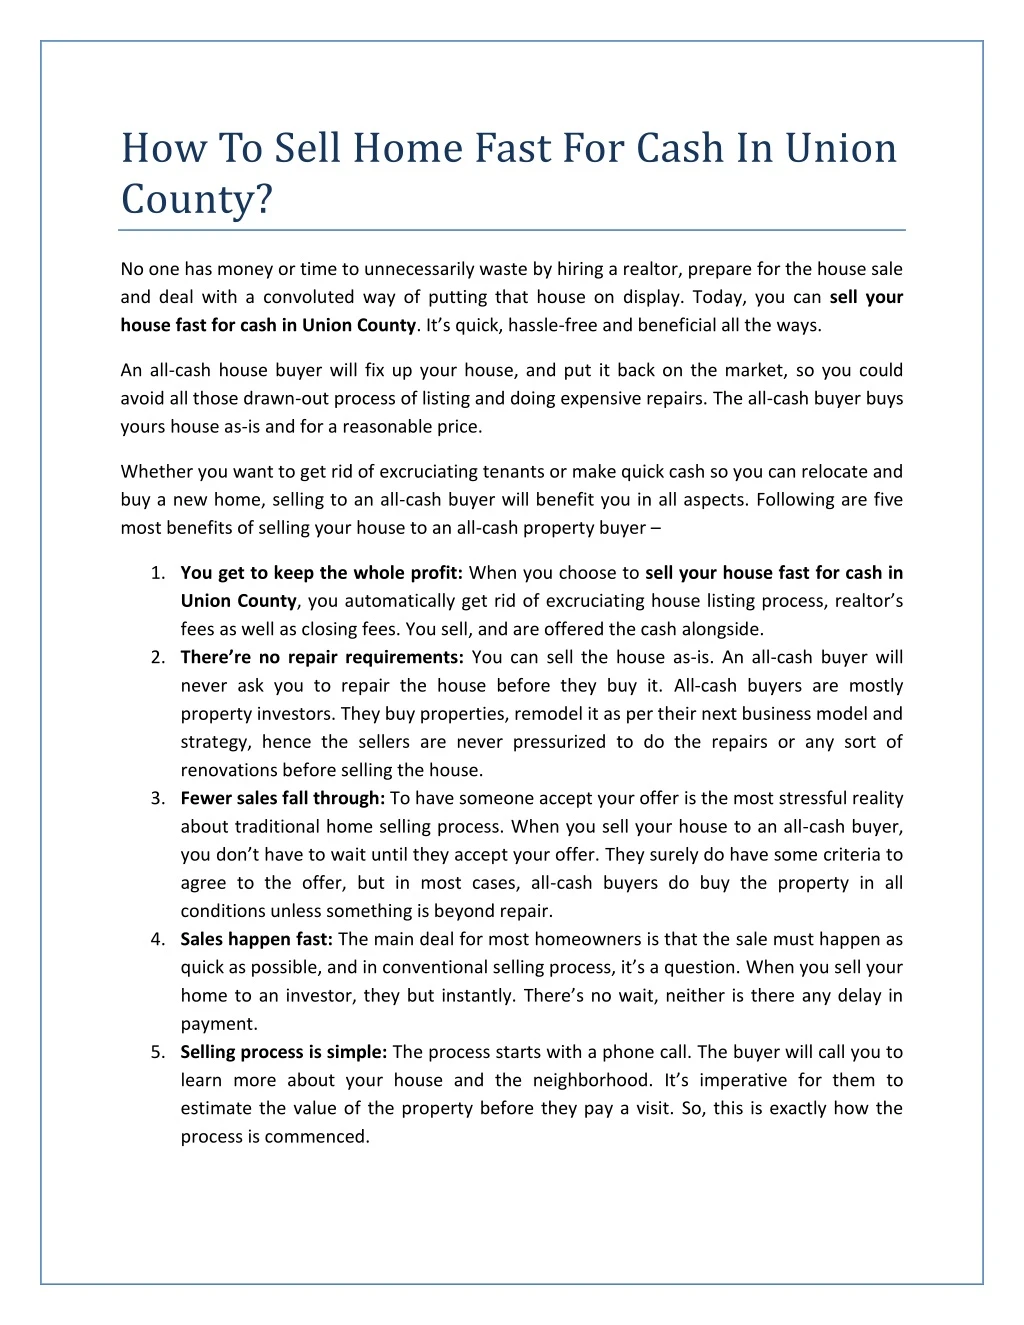 how to sell home fast for cash in union county